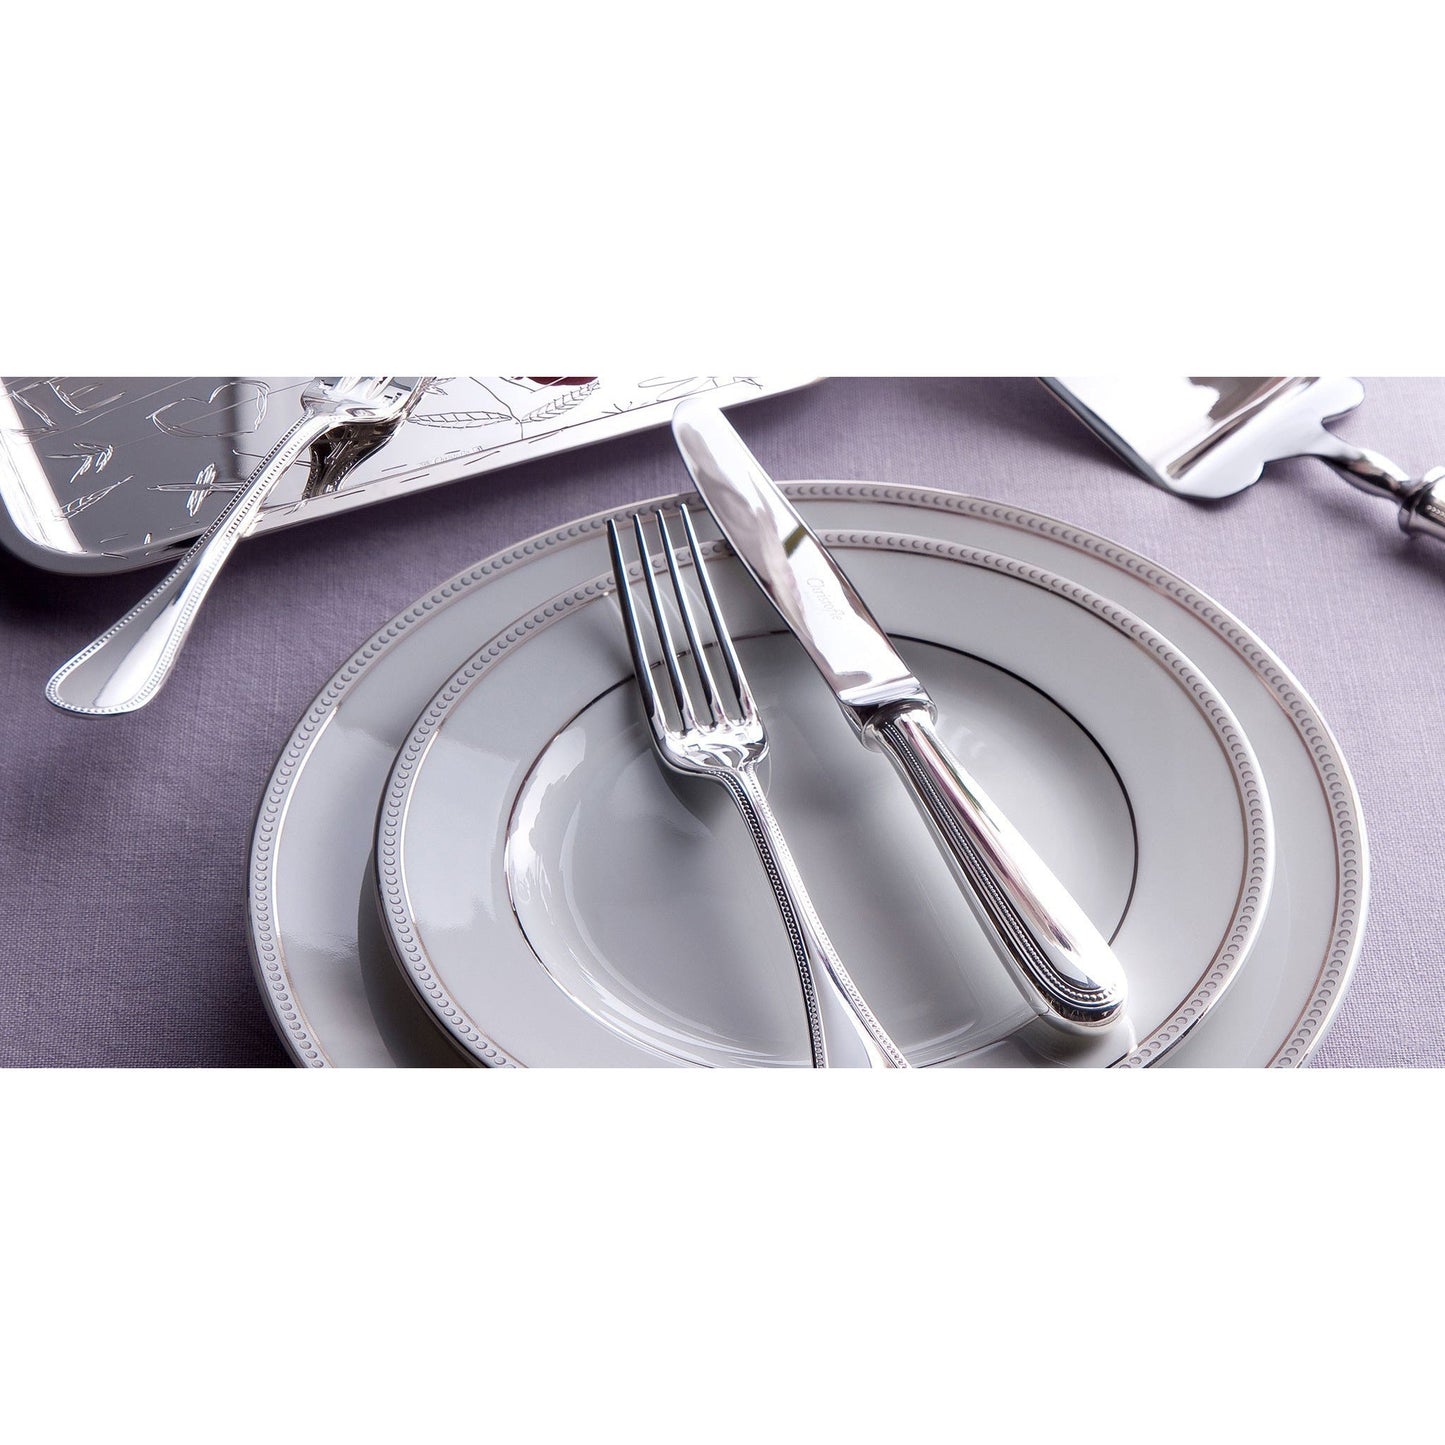 Perles 5-Piece Place Setting